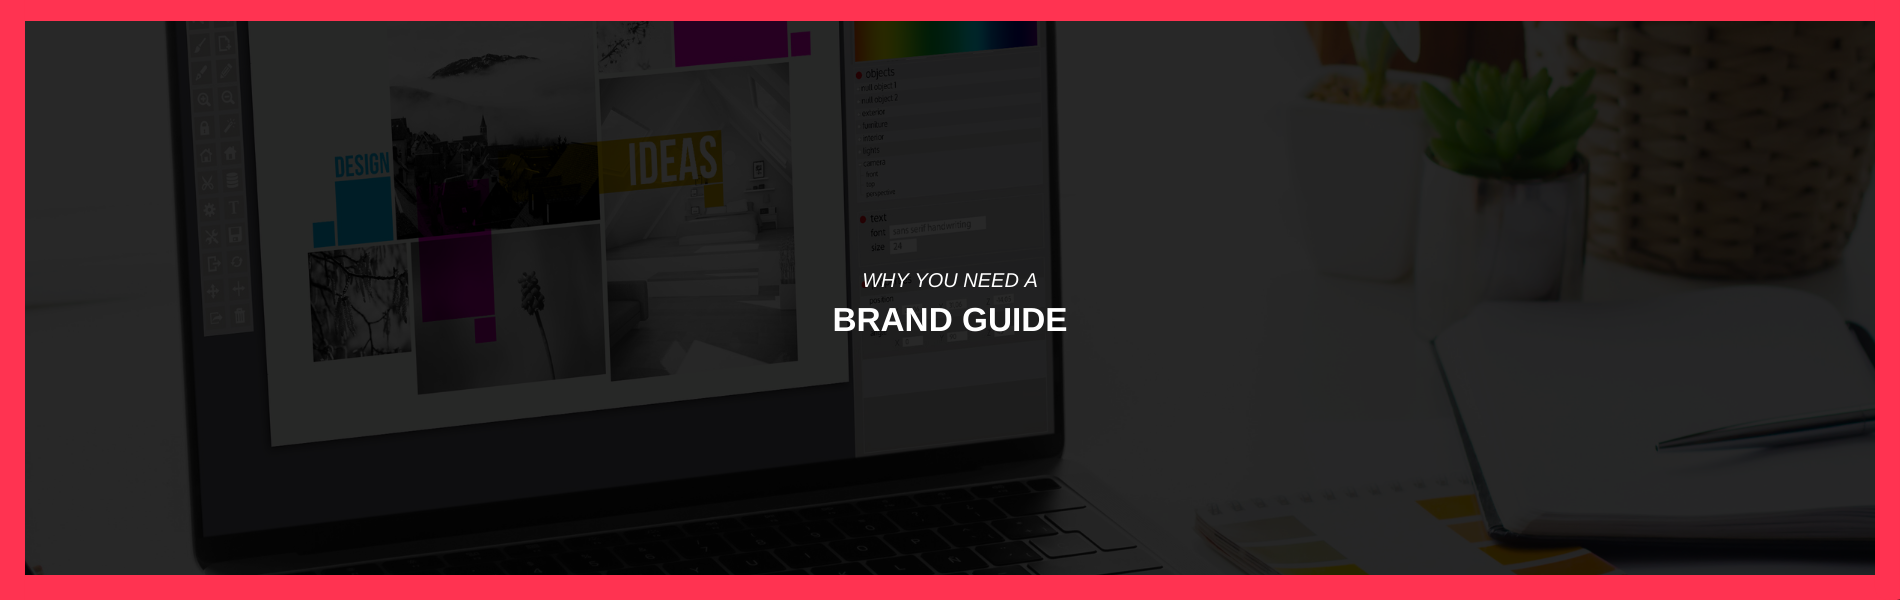 Here are the top 5 reasons why your business needs a brand guide.